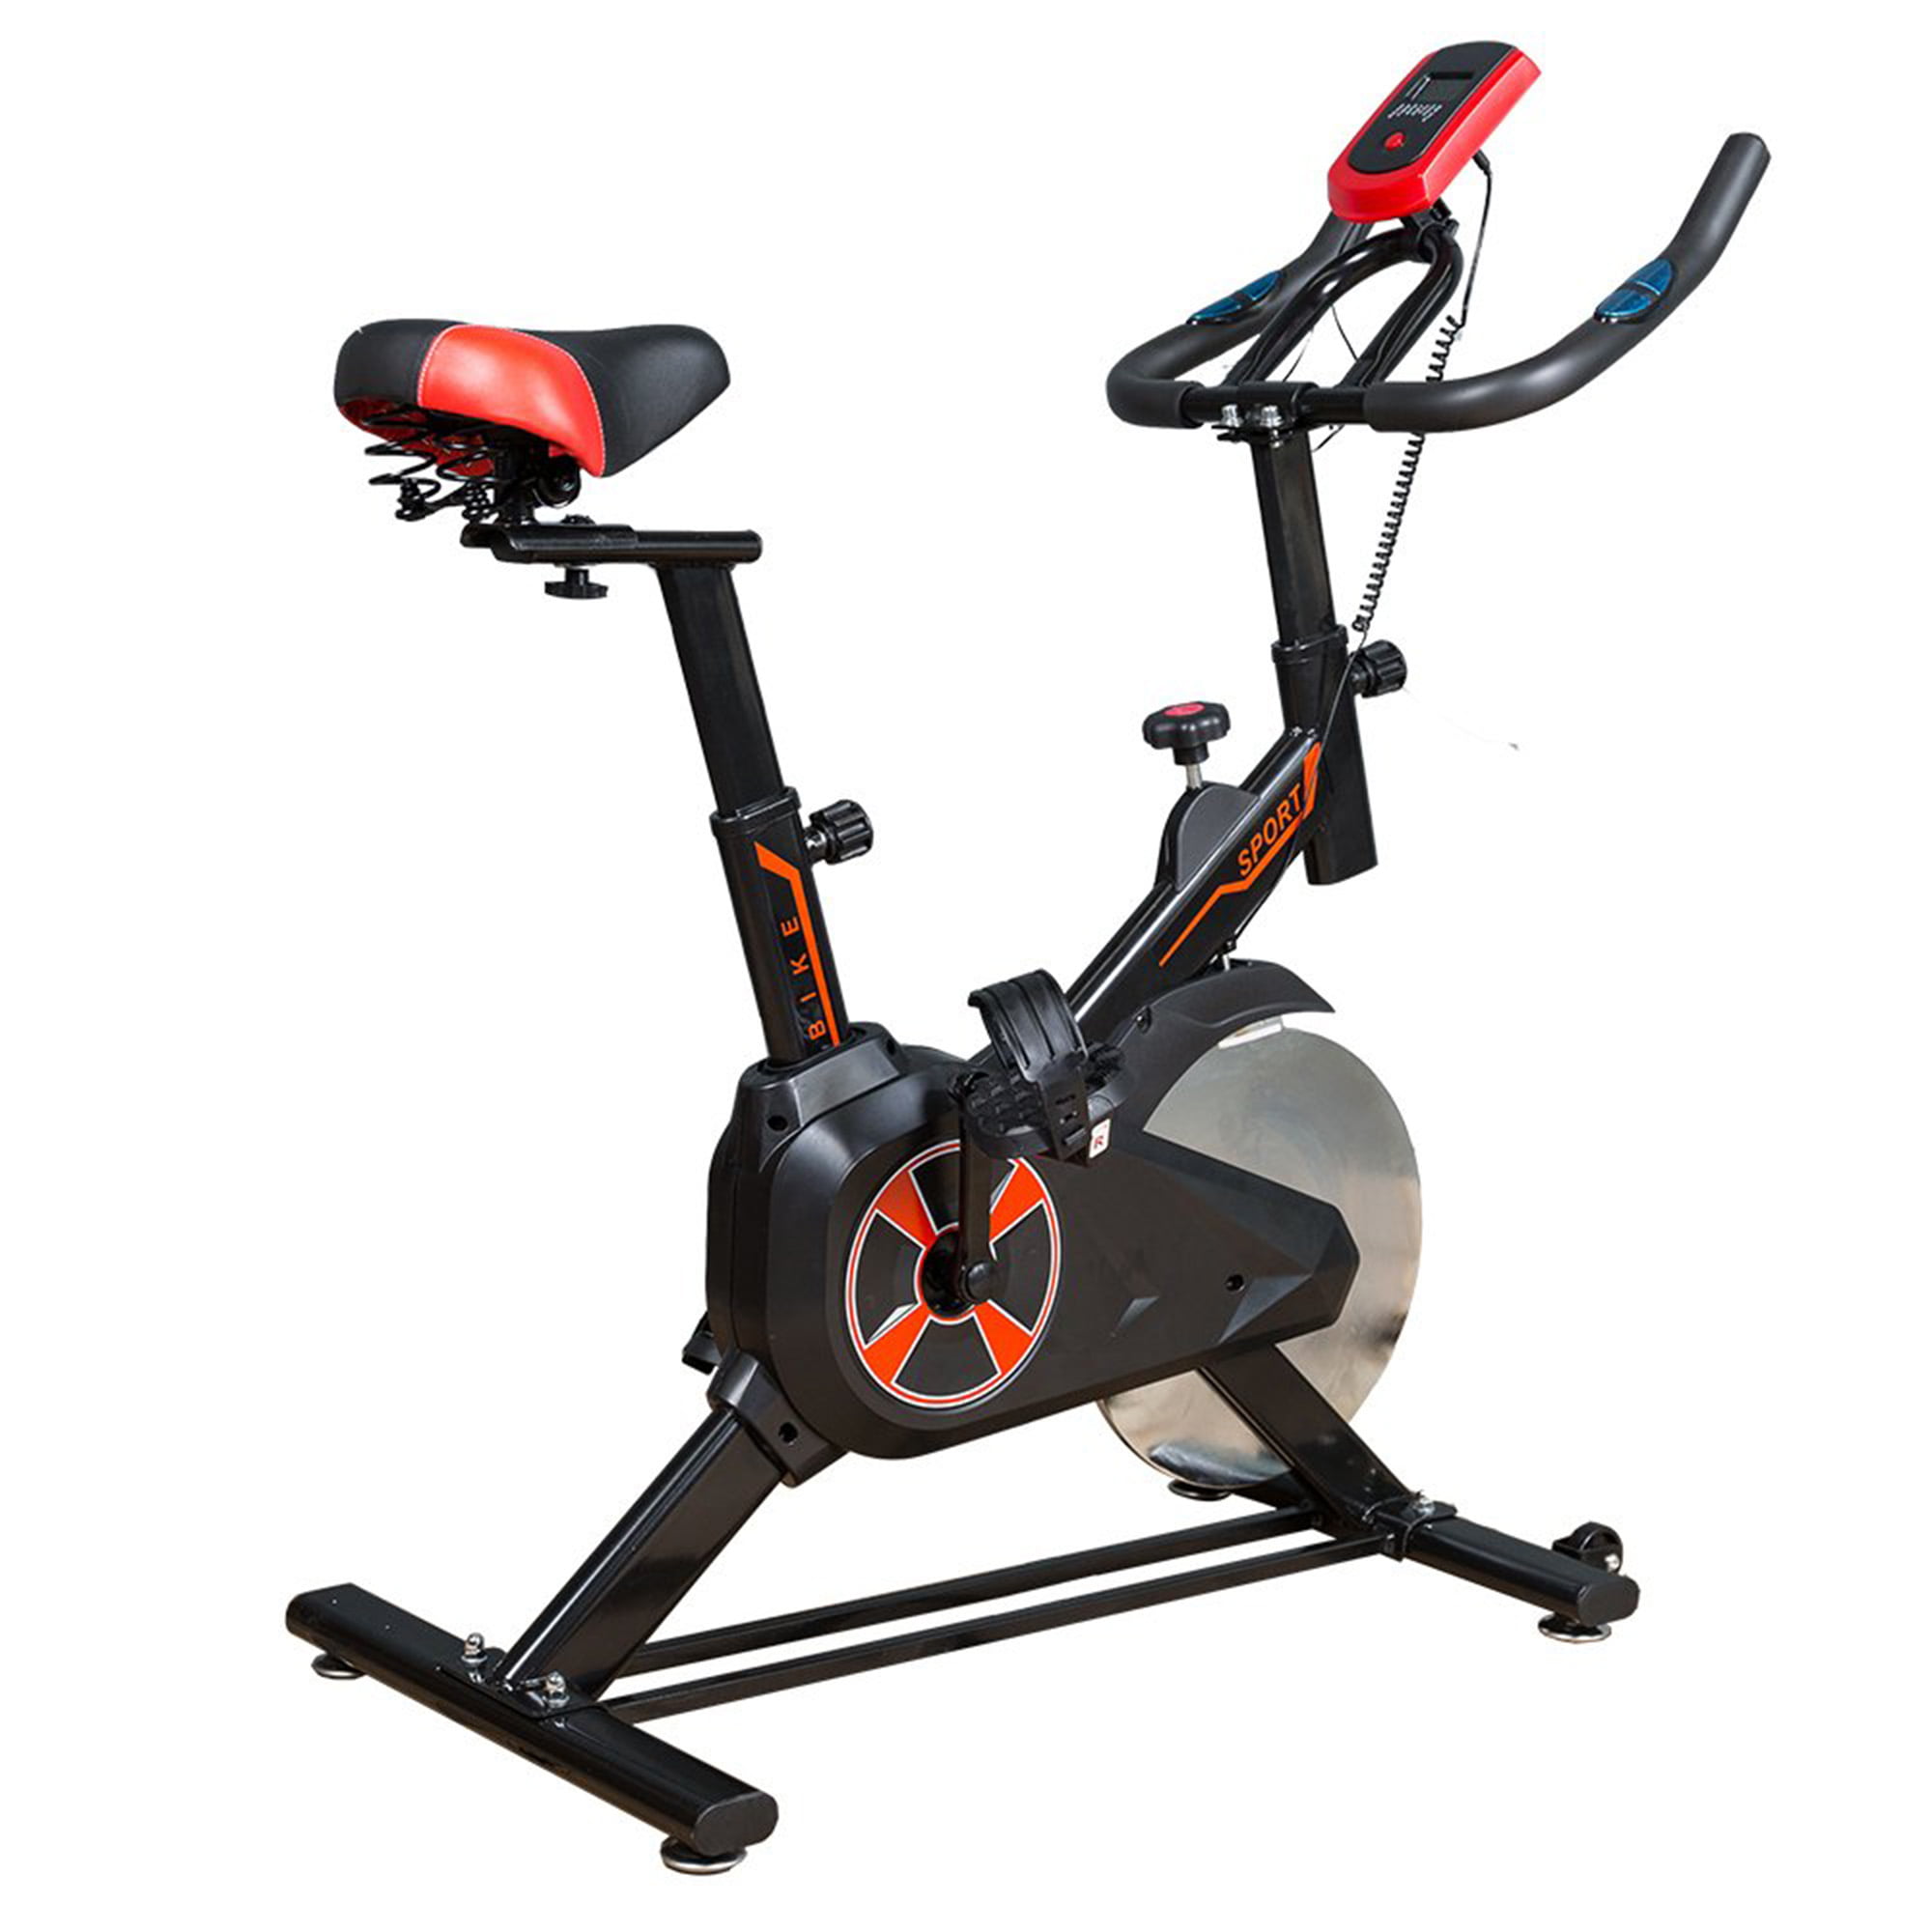 077 Sunny Health /& Fitness Squat Assist Row-N-Ride Trainer for Squat Exercise and Glutes Workout Sunny Distributor Inc NO